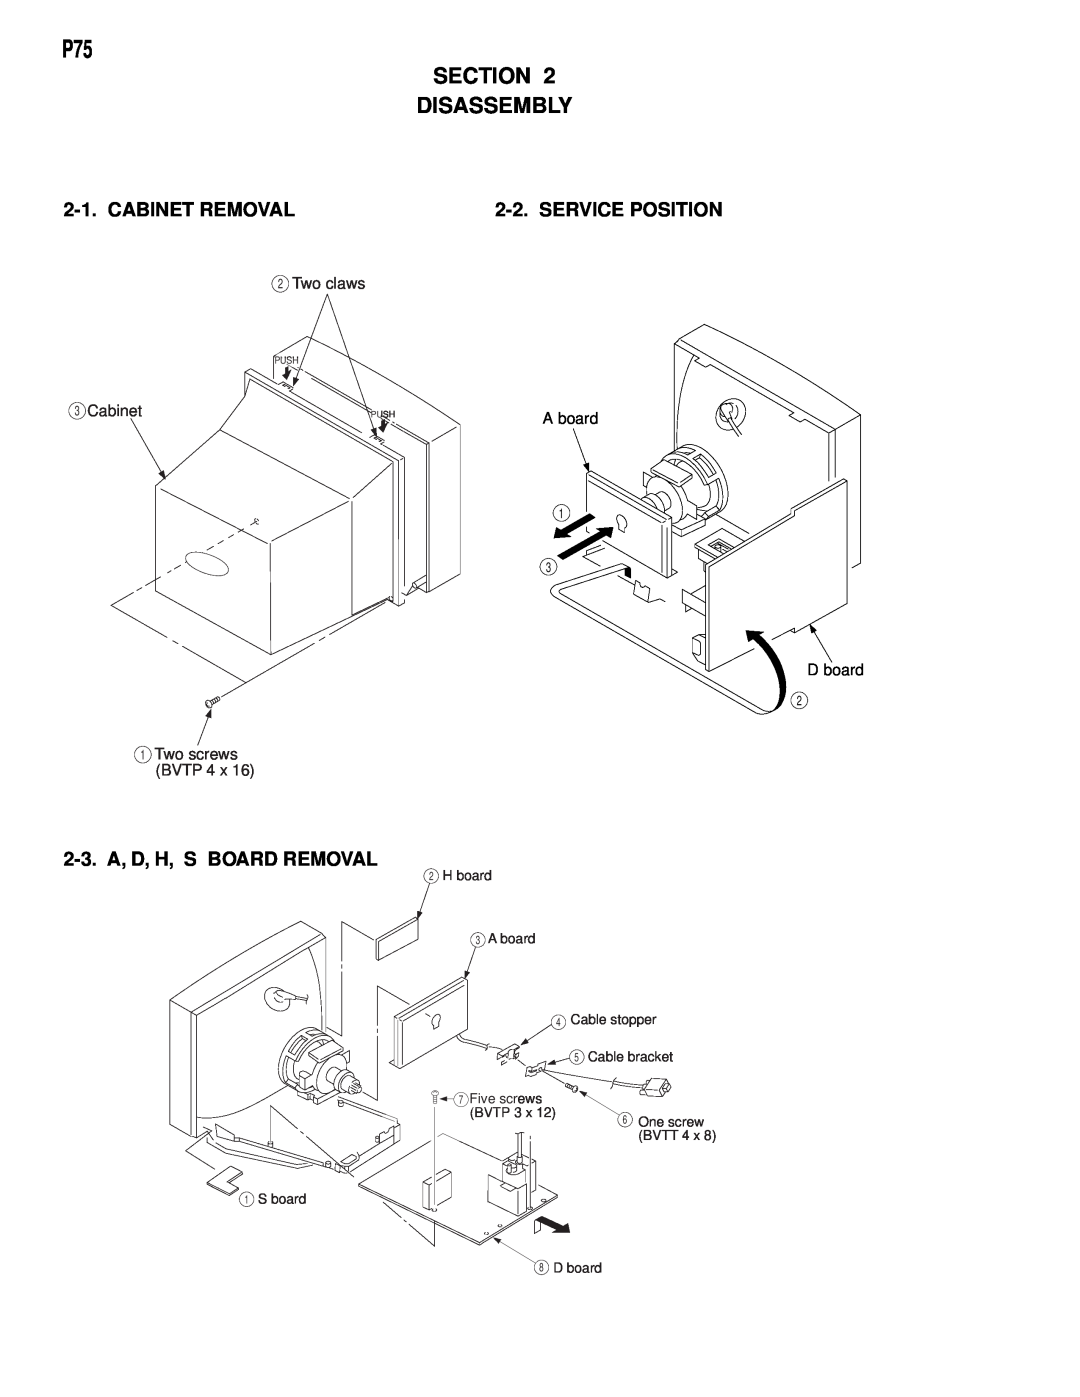 Compaq D-1H Section Disassembly, Cabinet Removal, Service Position, 2-3. A, D, H, S BOARD REMOVAL, Two claws, A board 